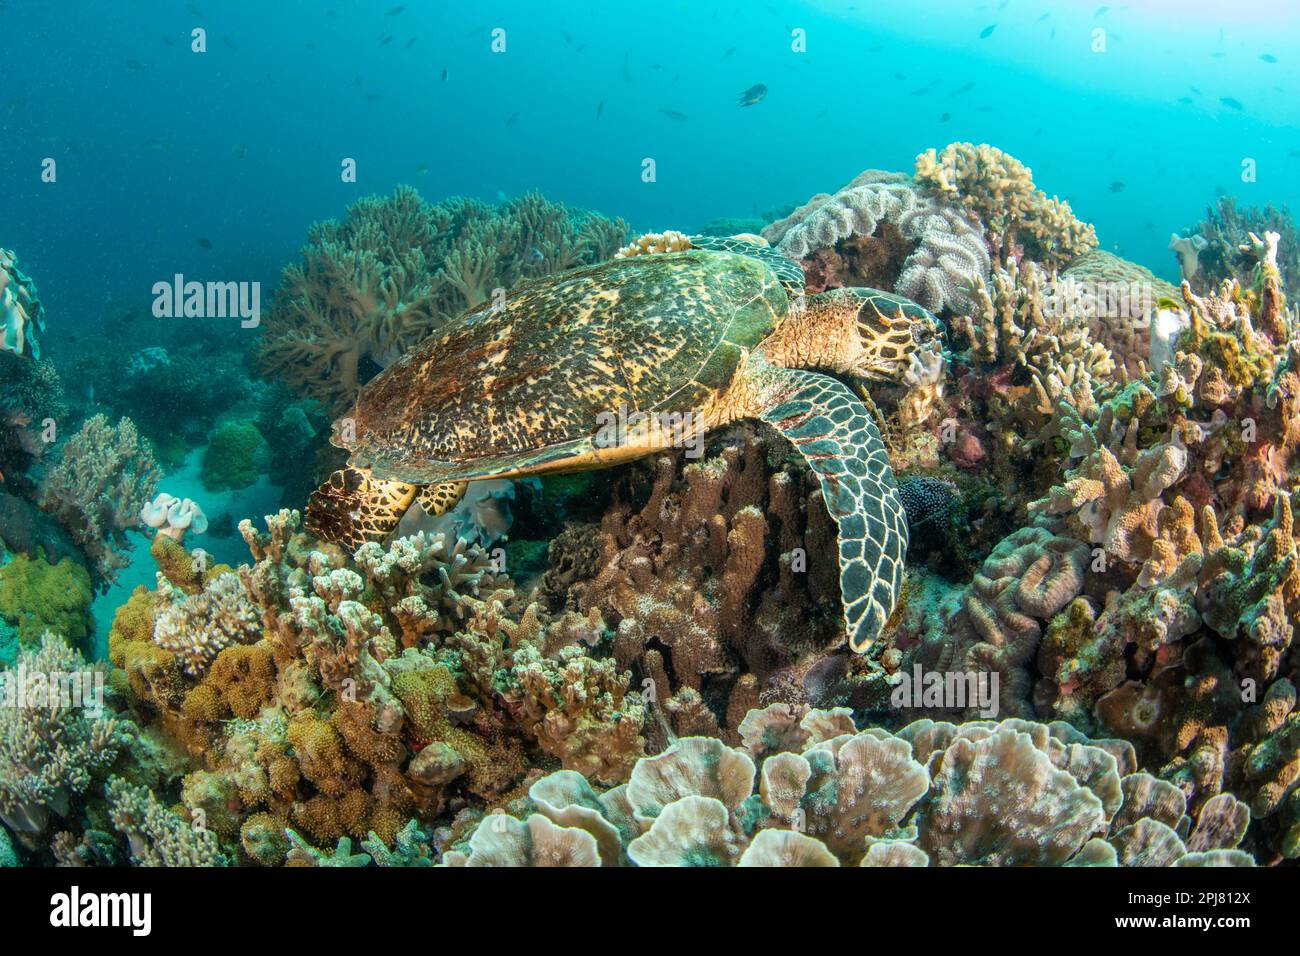 This critically endangered hawksbill turtle, Eretmochelys imbricata, is feeding on a sponge down in the reef, Philippines, Pacific Ocean. Stock Photo